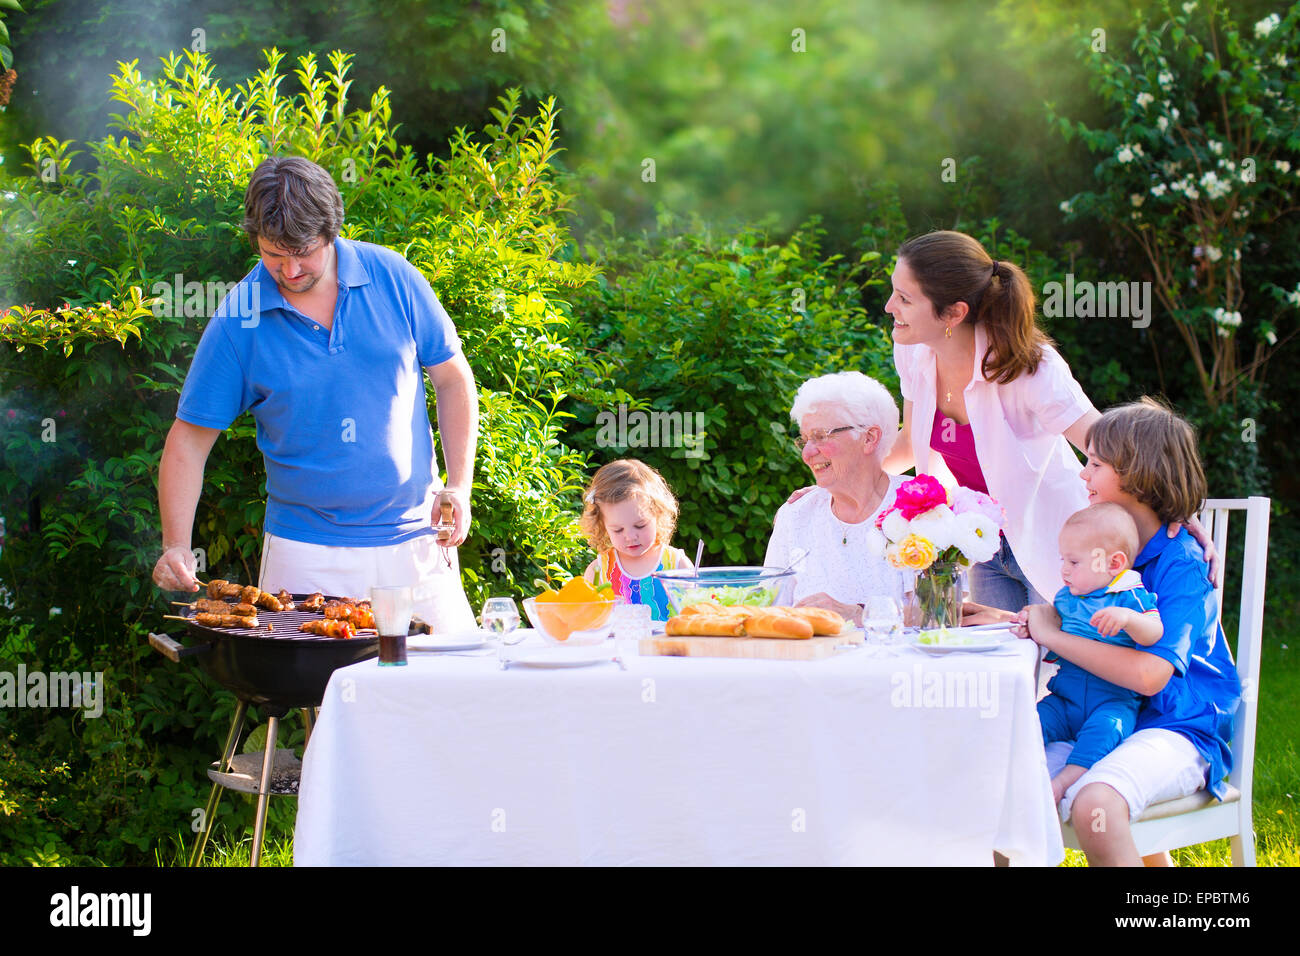 Grill barbecue backyard party. Happy big family enjoying BBQ lunch with grandmother eating grilled meat in the garden Stock Photo